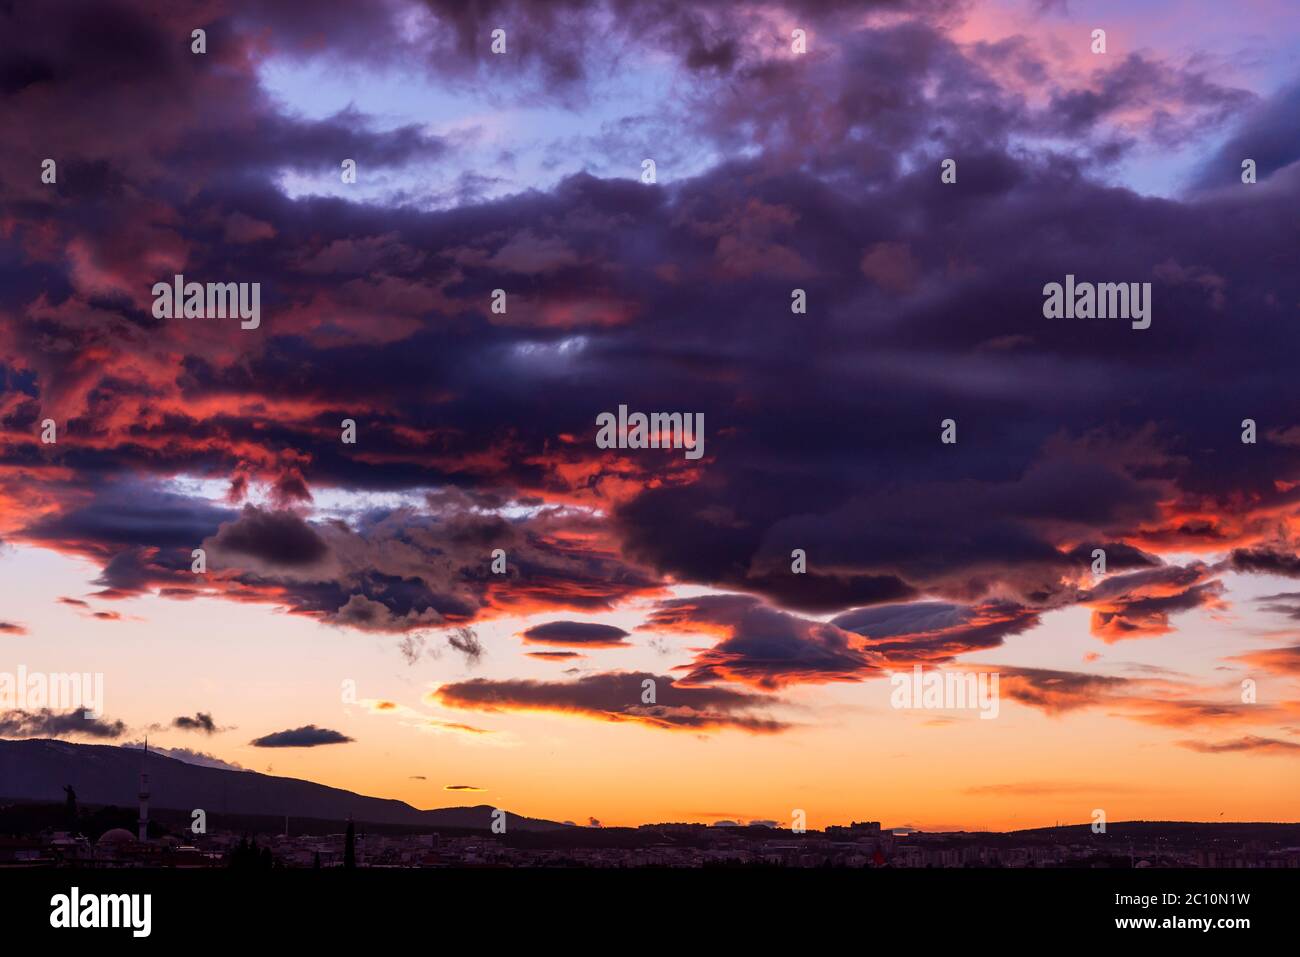 Cloudy and moody sky with beautiful colors of early morning before sunrise Stock Photo